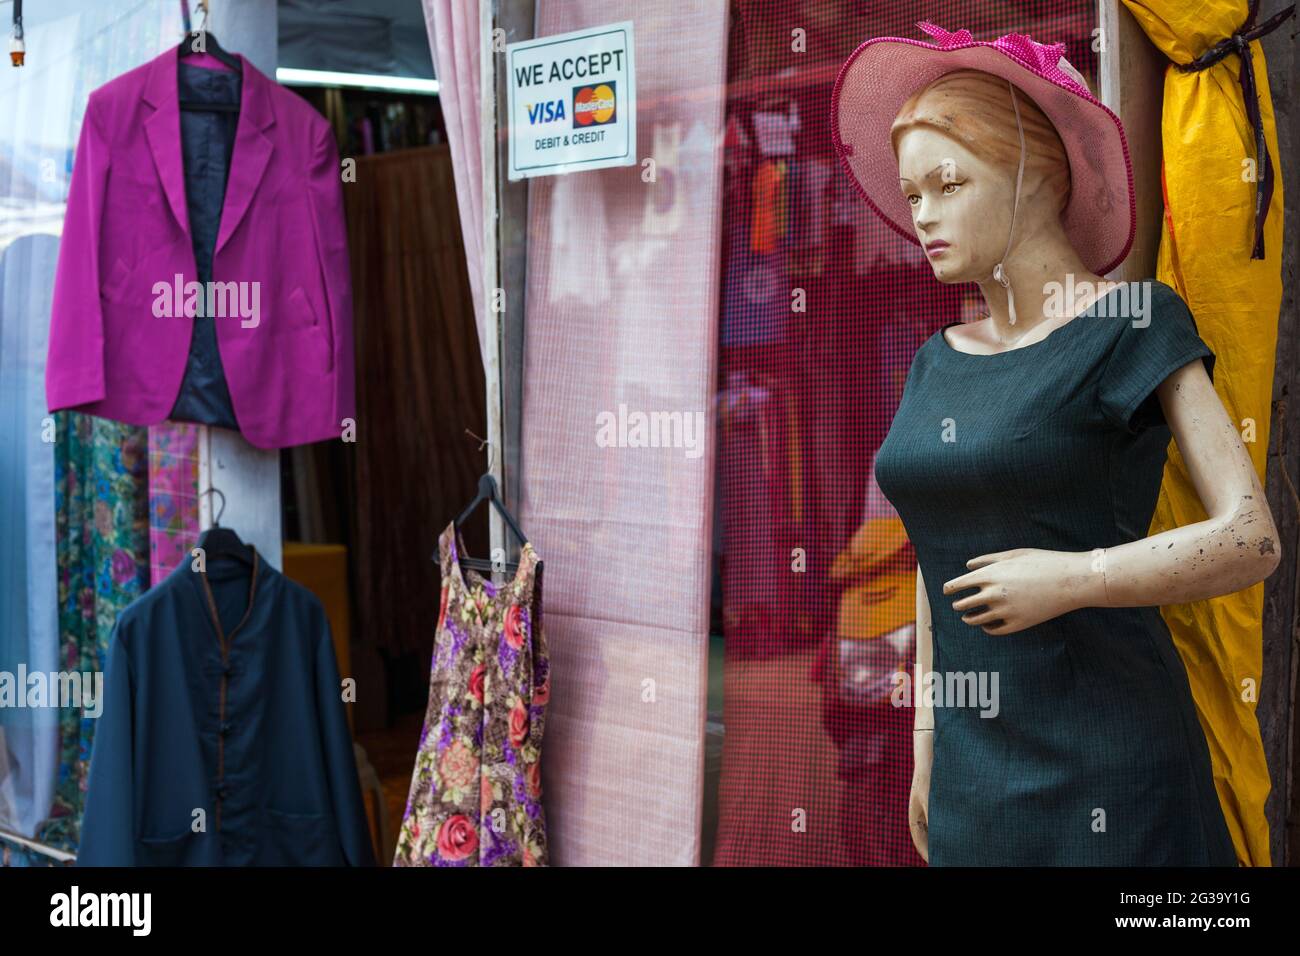 Bizarre face on clothes mannequin outside clothing store, Patnem